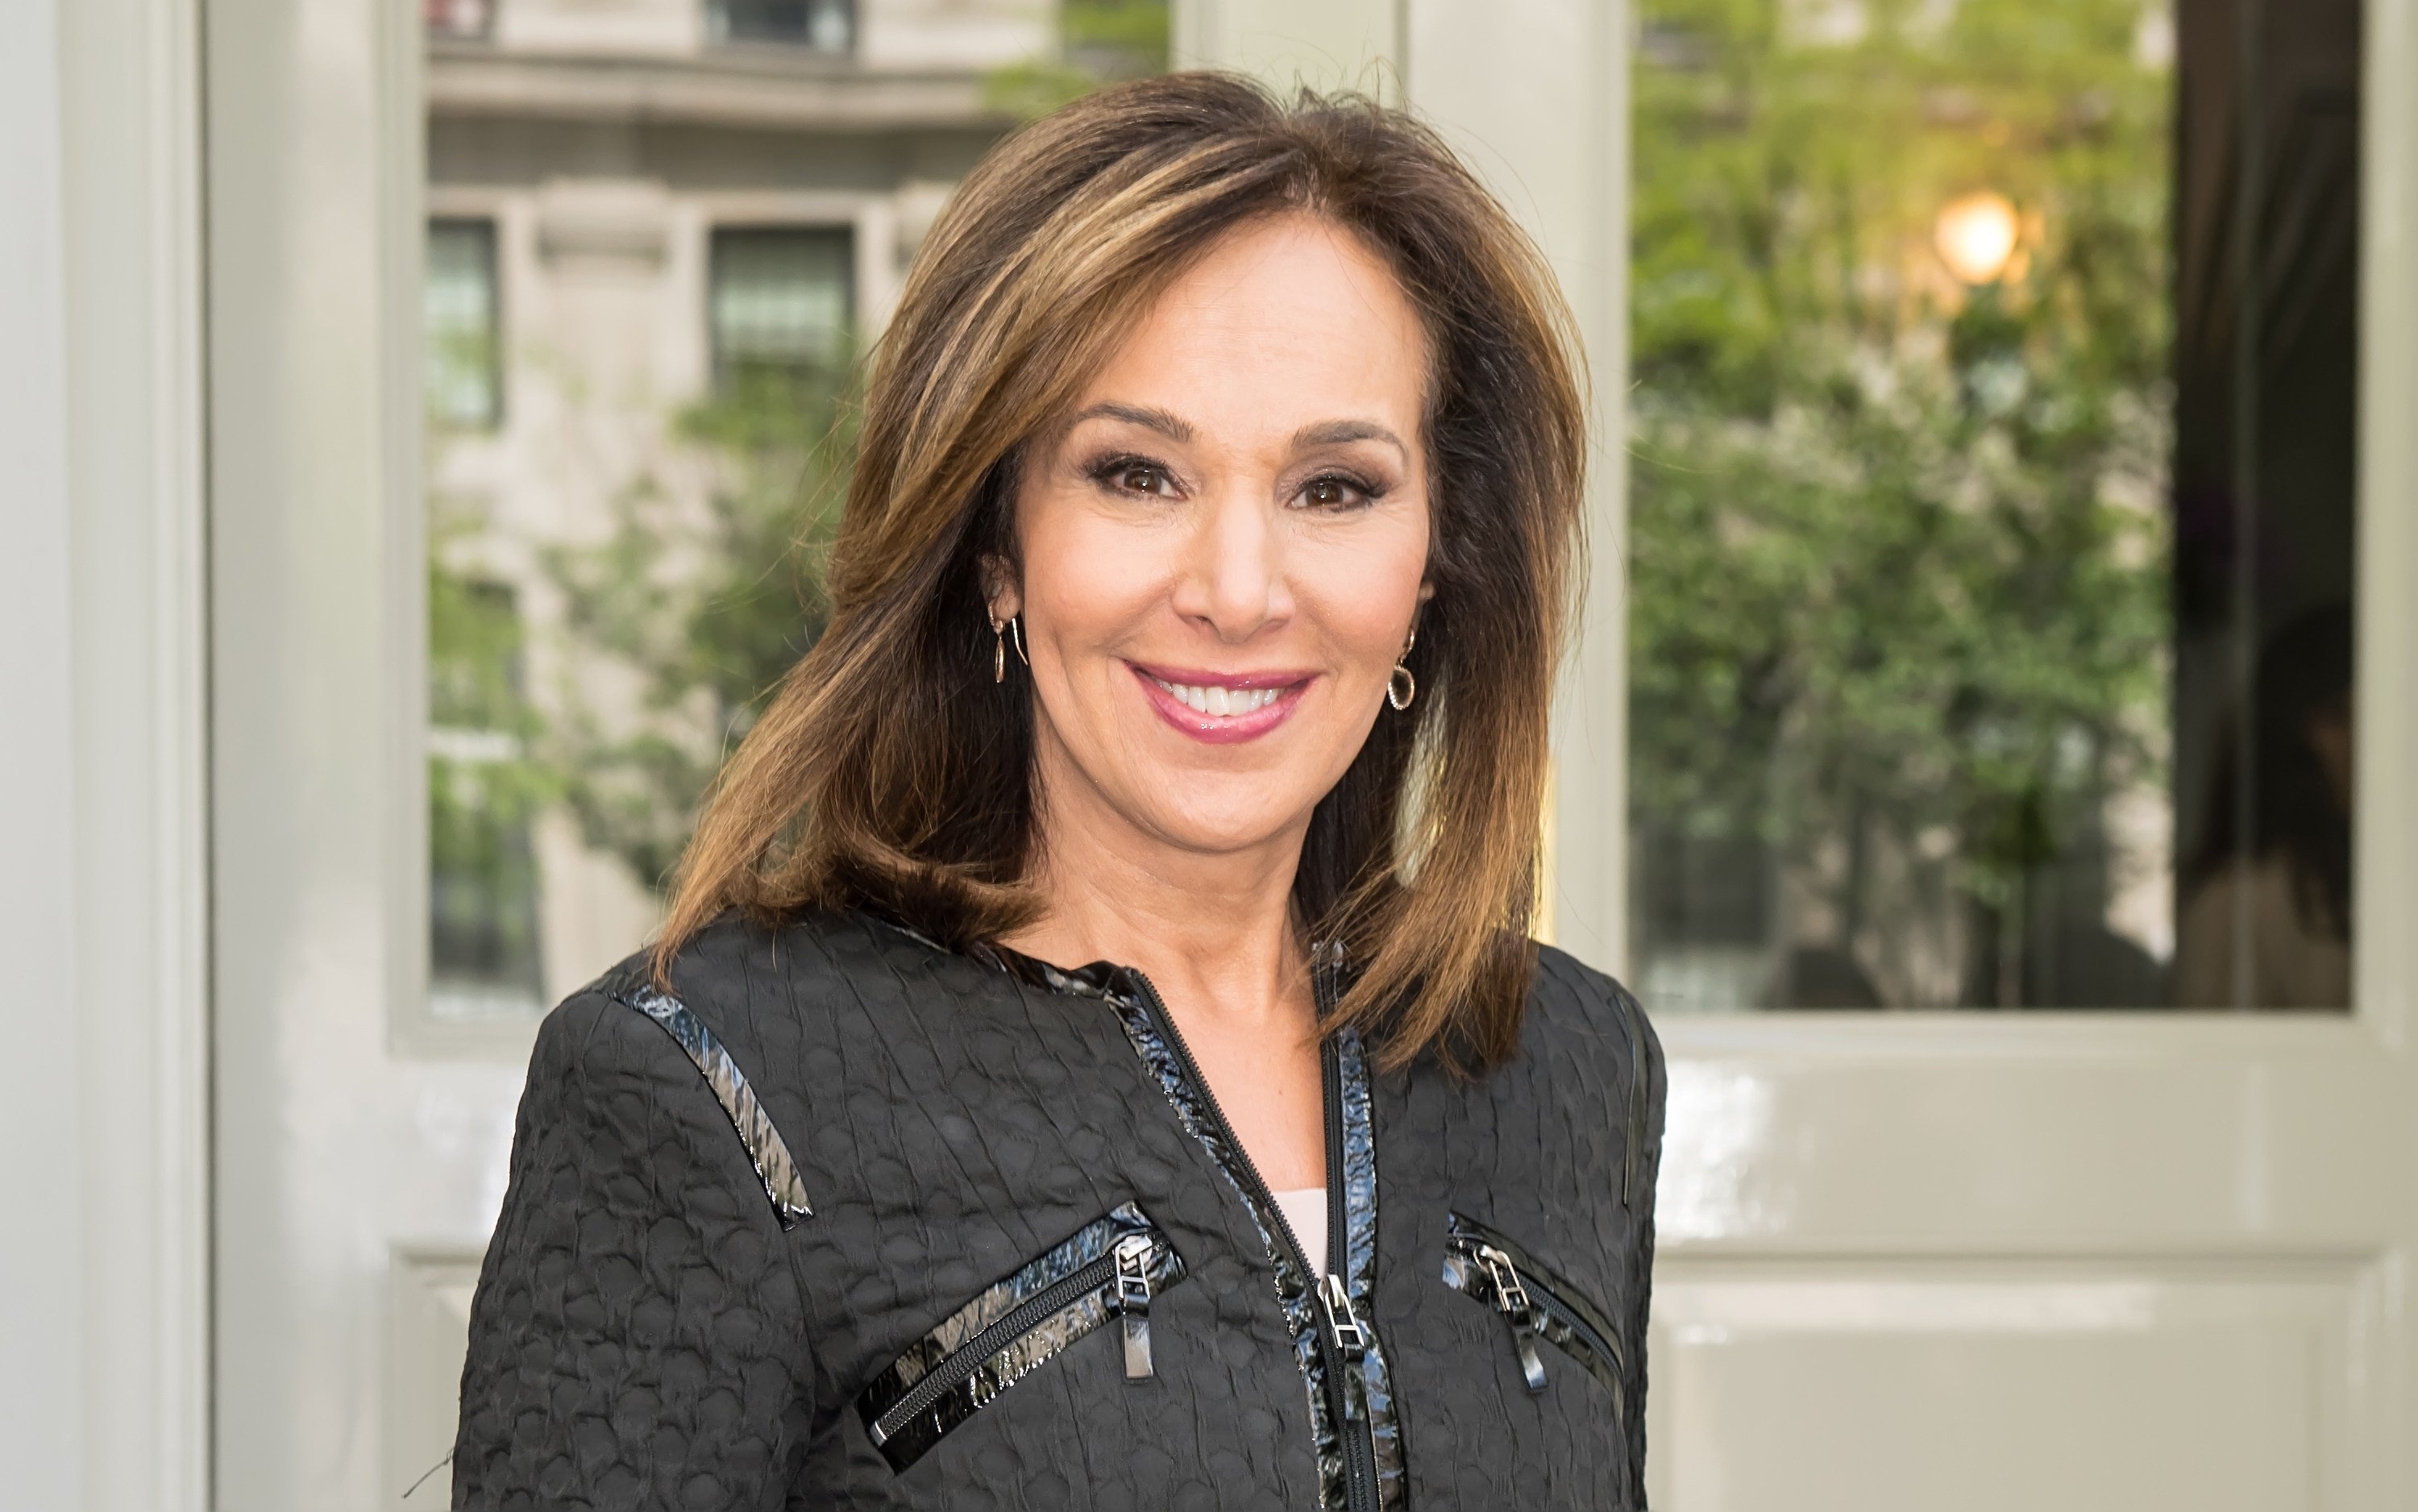 Rosanna Scotto is best known as an anchor, but her family’s restaurant draws in the big names in entertainment and politics, like Bill Clinton and Donald Trump. Photo: Getty Images